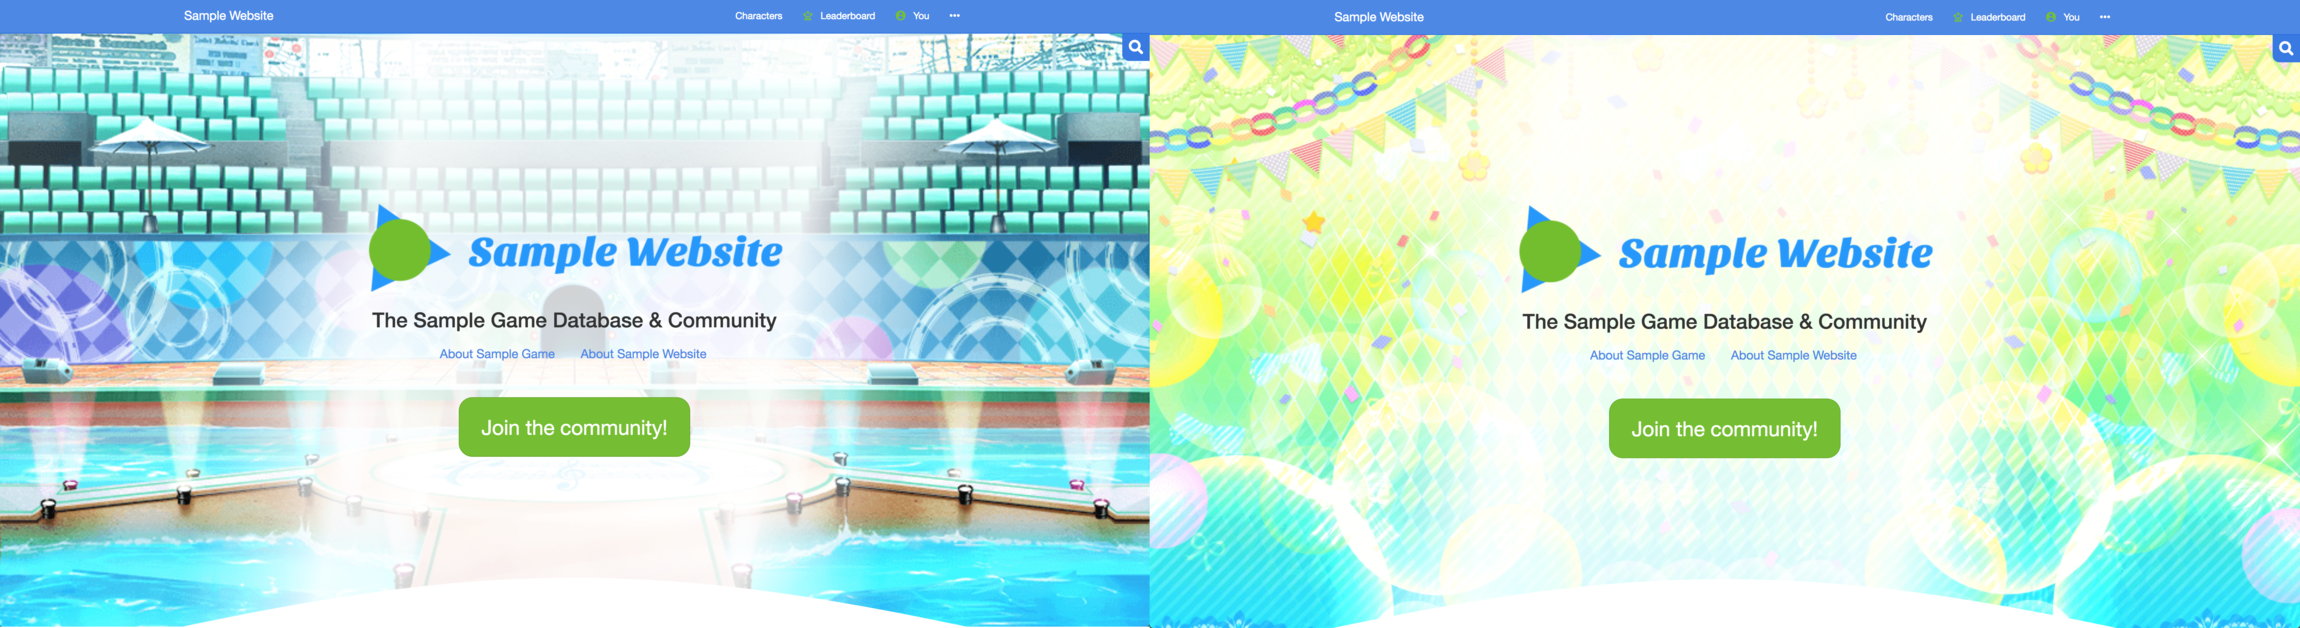 Examples of homepage with art background, centered